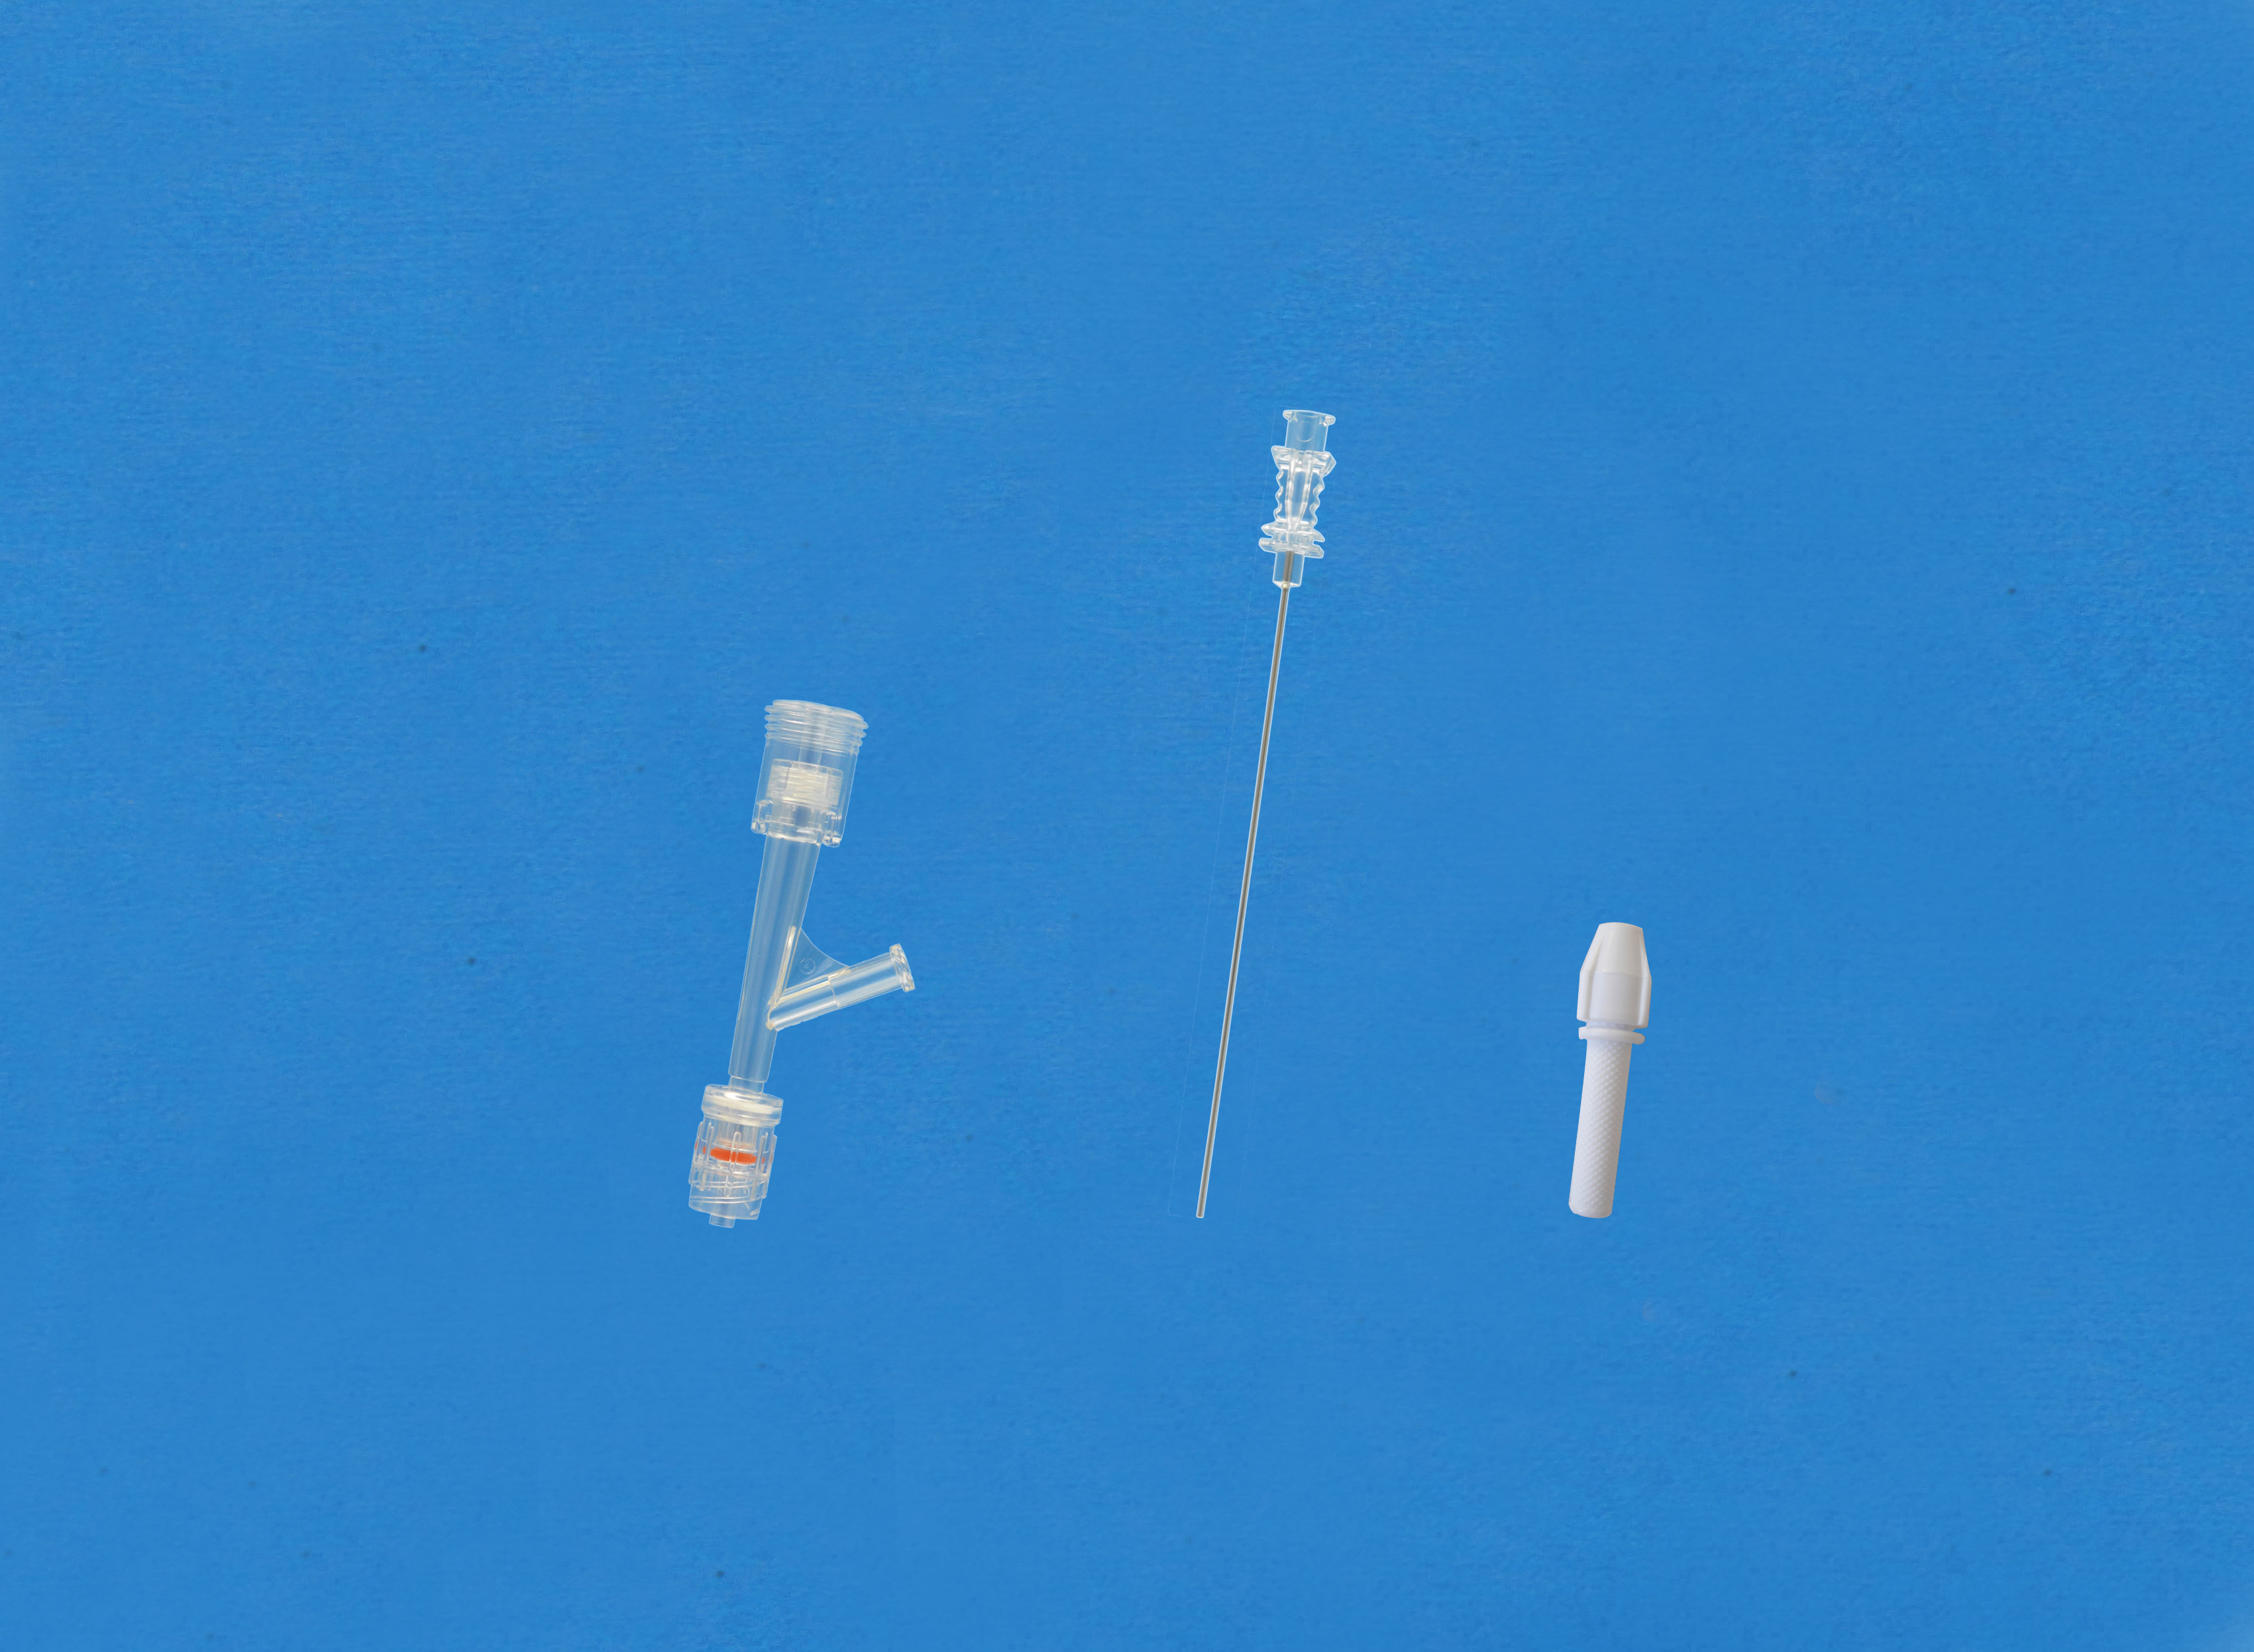 Haemostatic valves, Push-pull, Sideon Female Luer, Insertion Tool with Large Hub, White/Copper Torquer